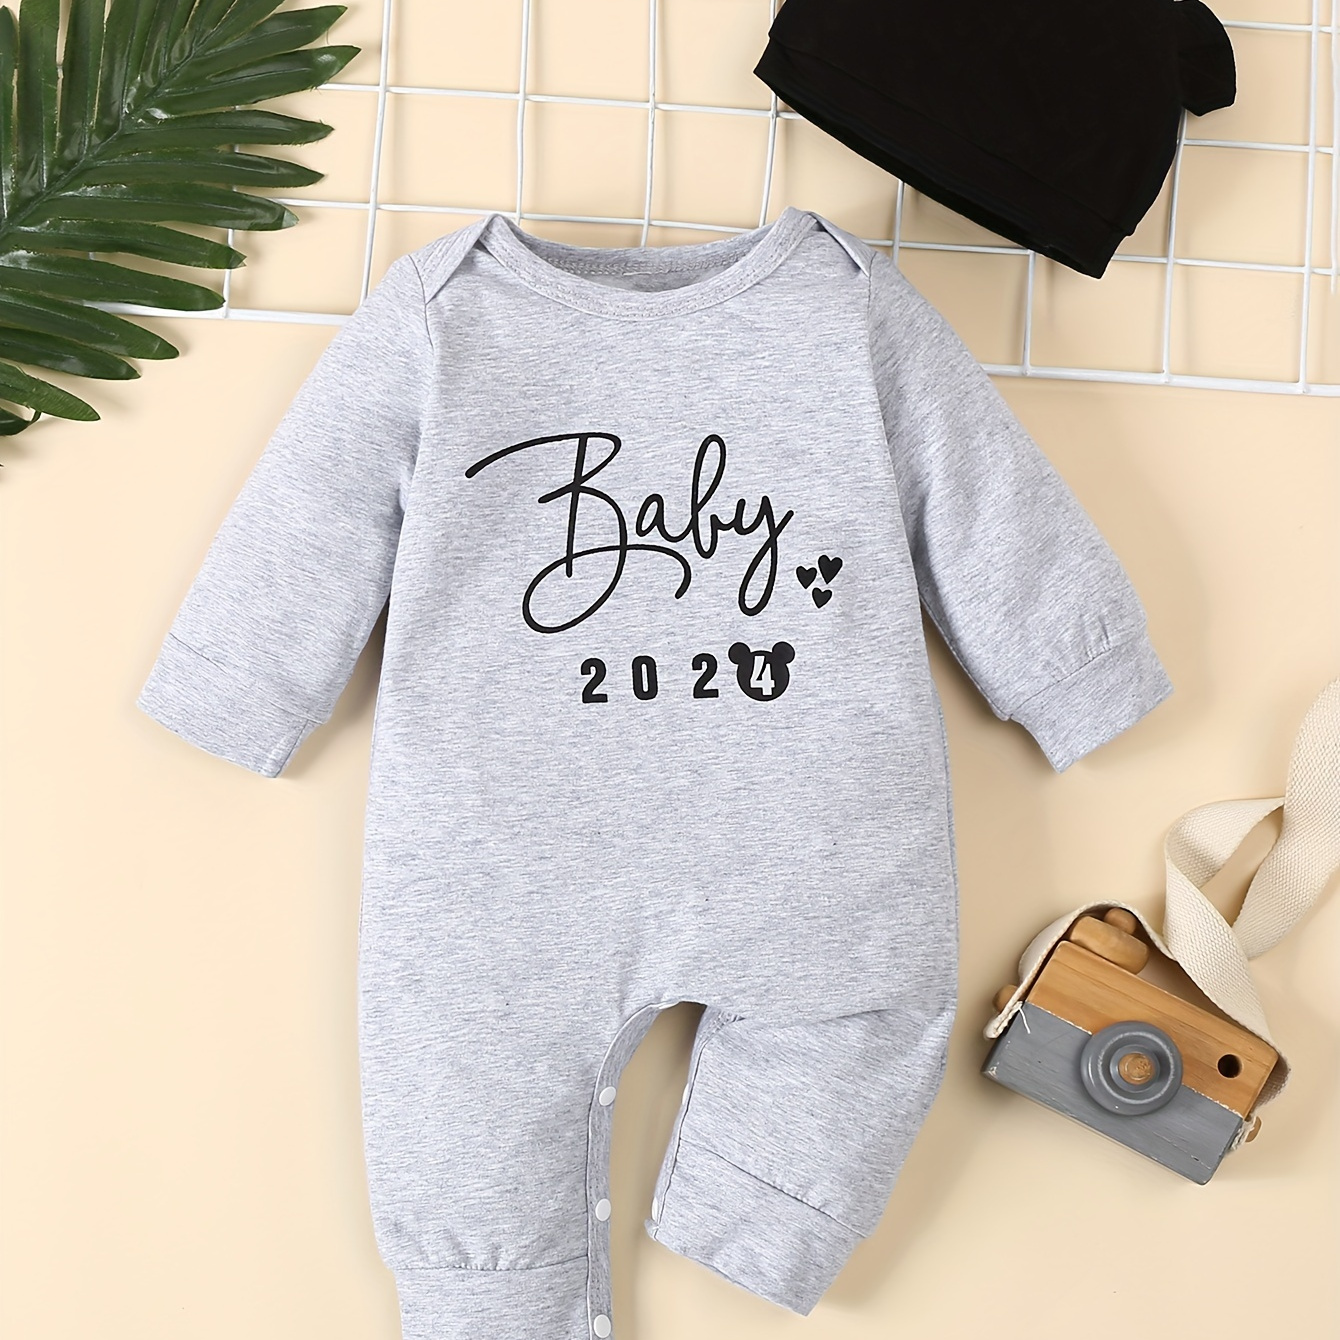 

Infant Unisex Long-sleeve Printed Romper With Cozy Hat, Casual Round Neck One-piece Jumpsuit For Baby, Grey Cotton Outfit Set